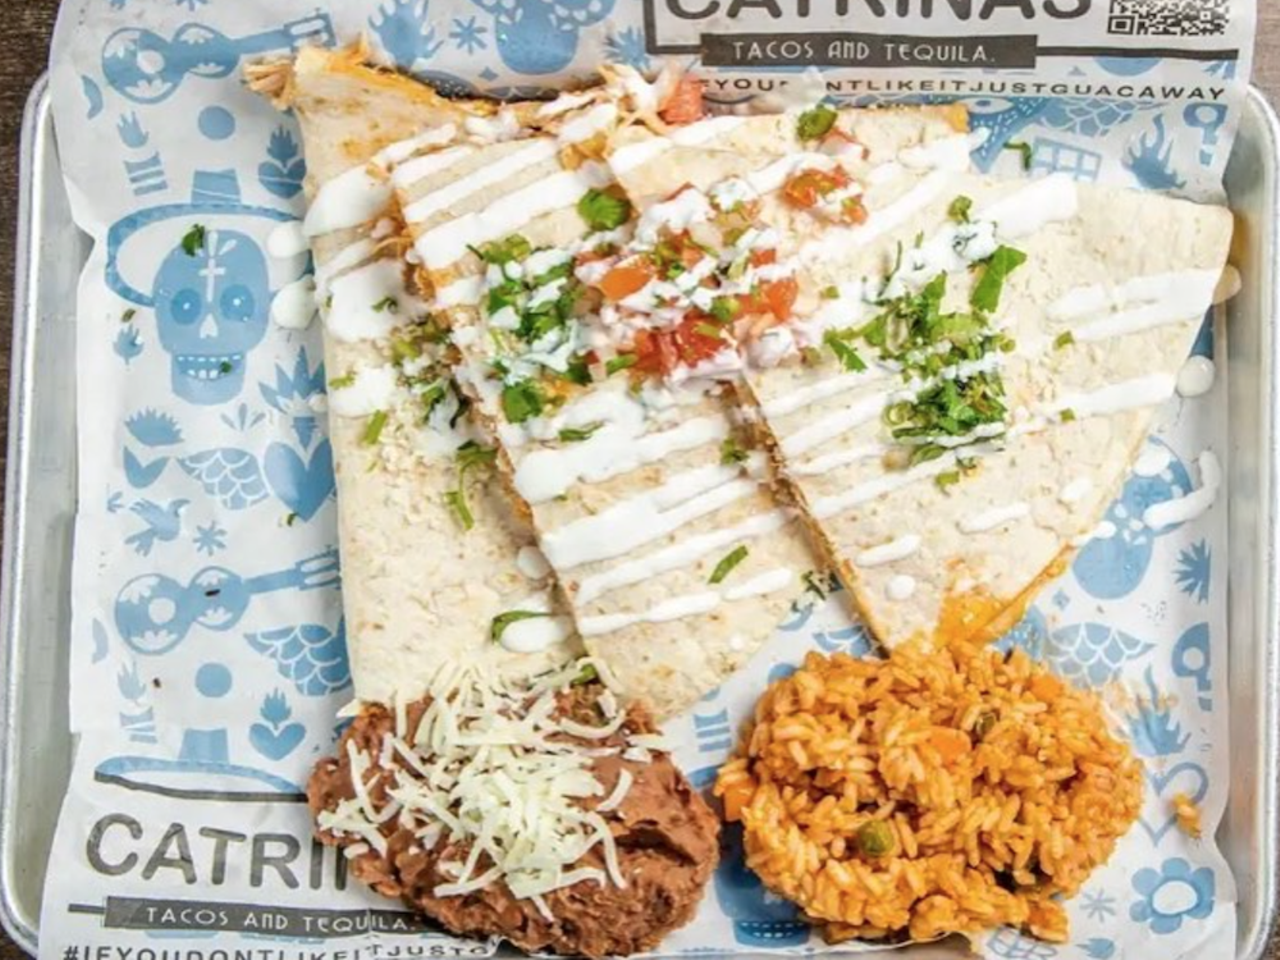 Catrinas Tacos and Tequila Bar
1611 N. Howard Ave., Tampa, 813-898-8628
With authentic recipes, the private Mexican Speakeasy 1900 vault room showcases the Día de los Muertos celebration from Mexican culture for special occasions, private dining and bottle service only. 
Photo via Catrinas Taco and Tequila Bar/Facebook